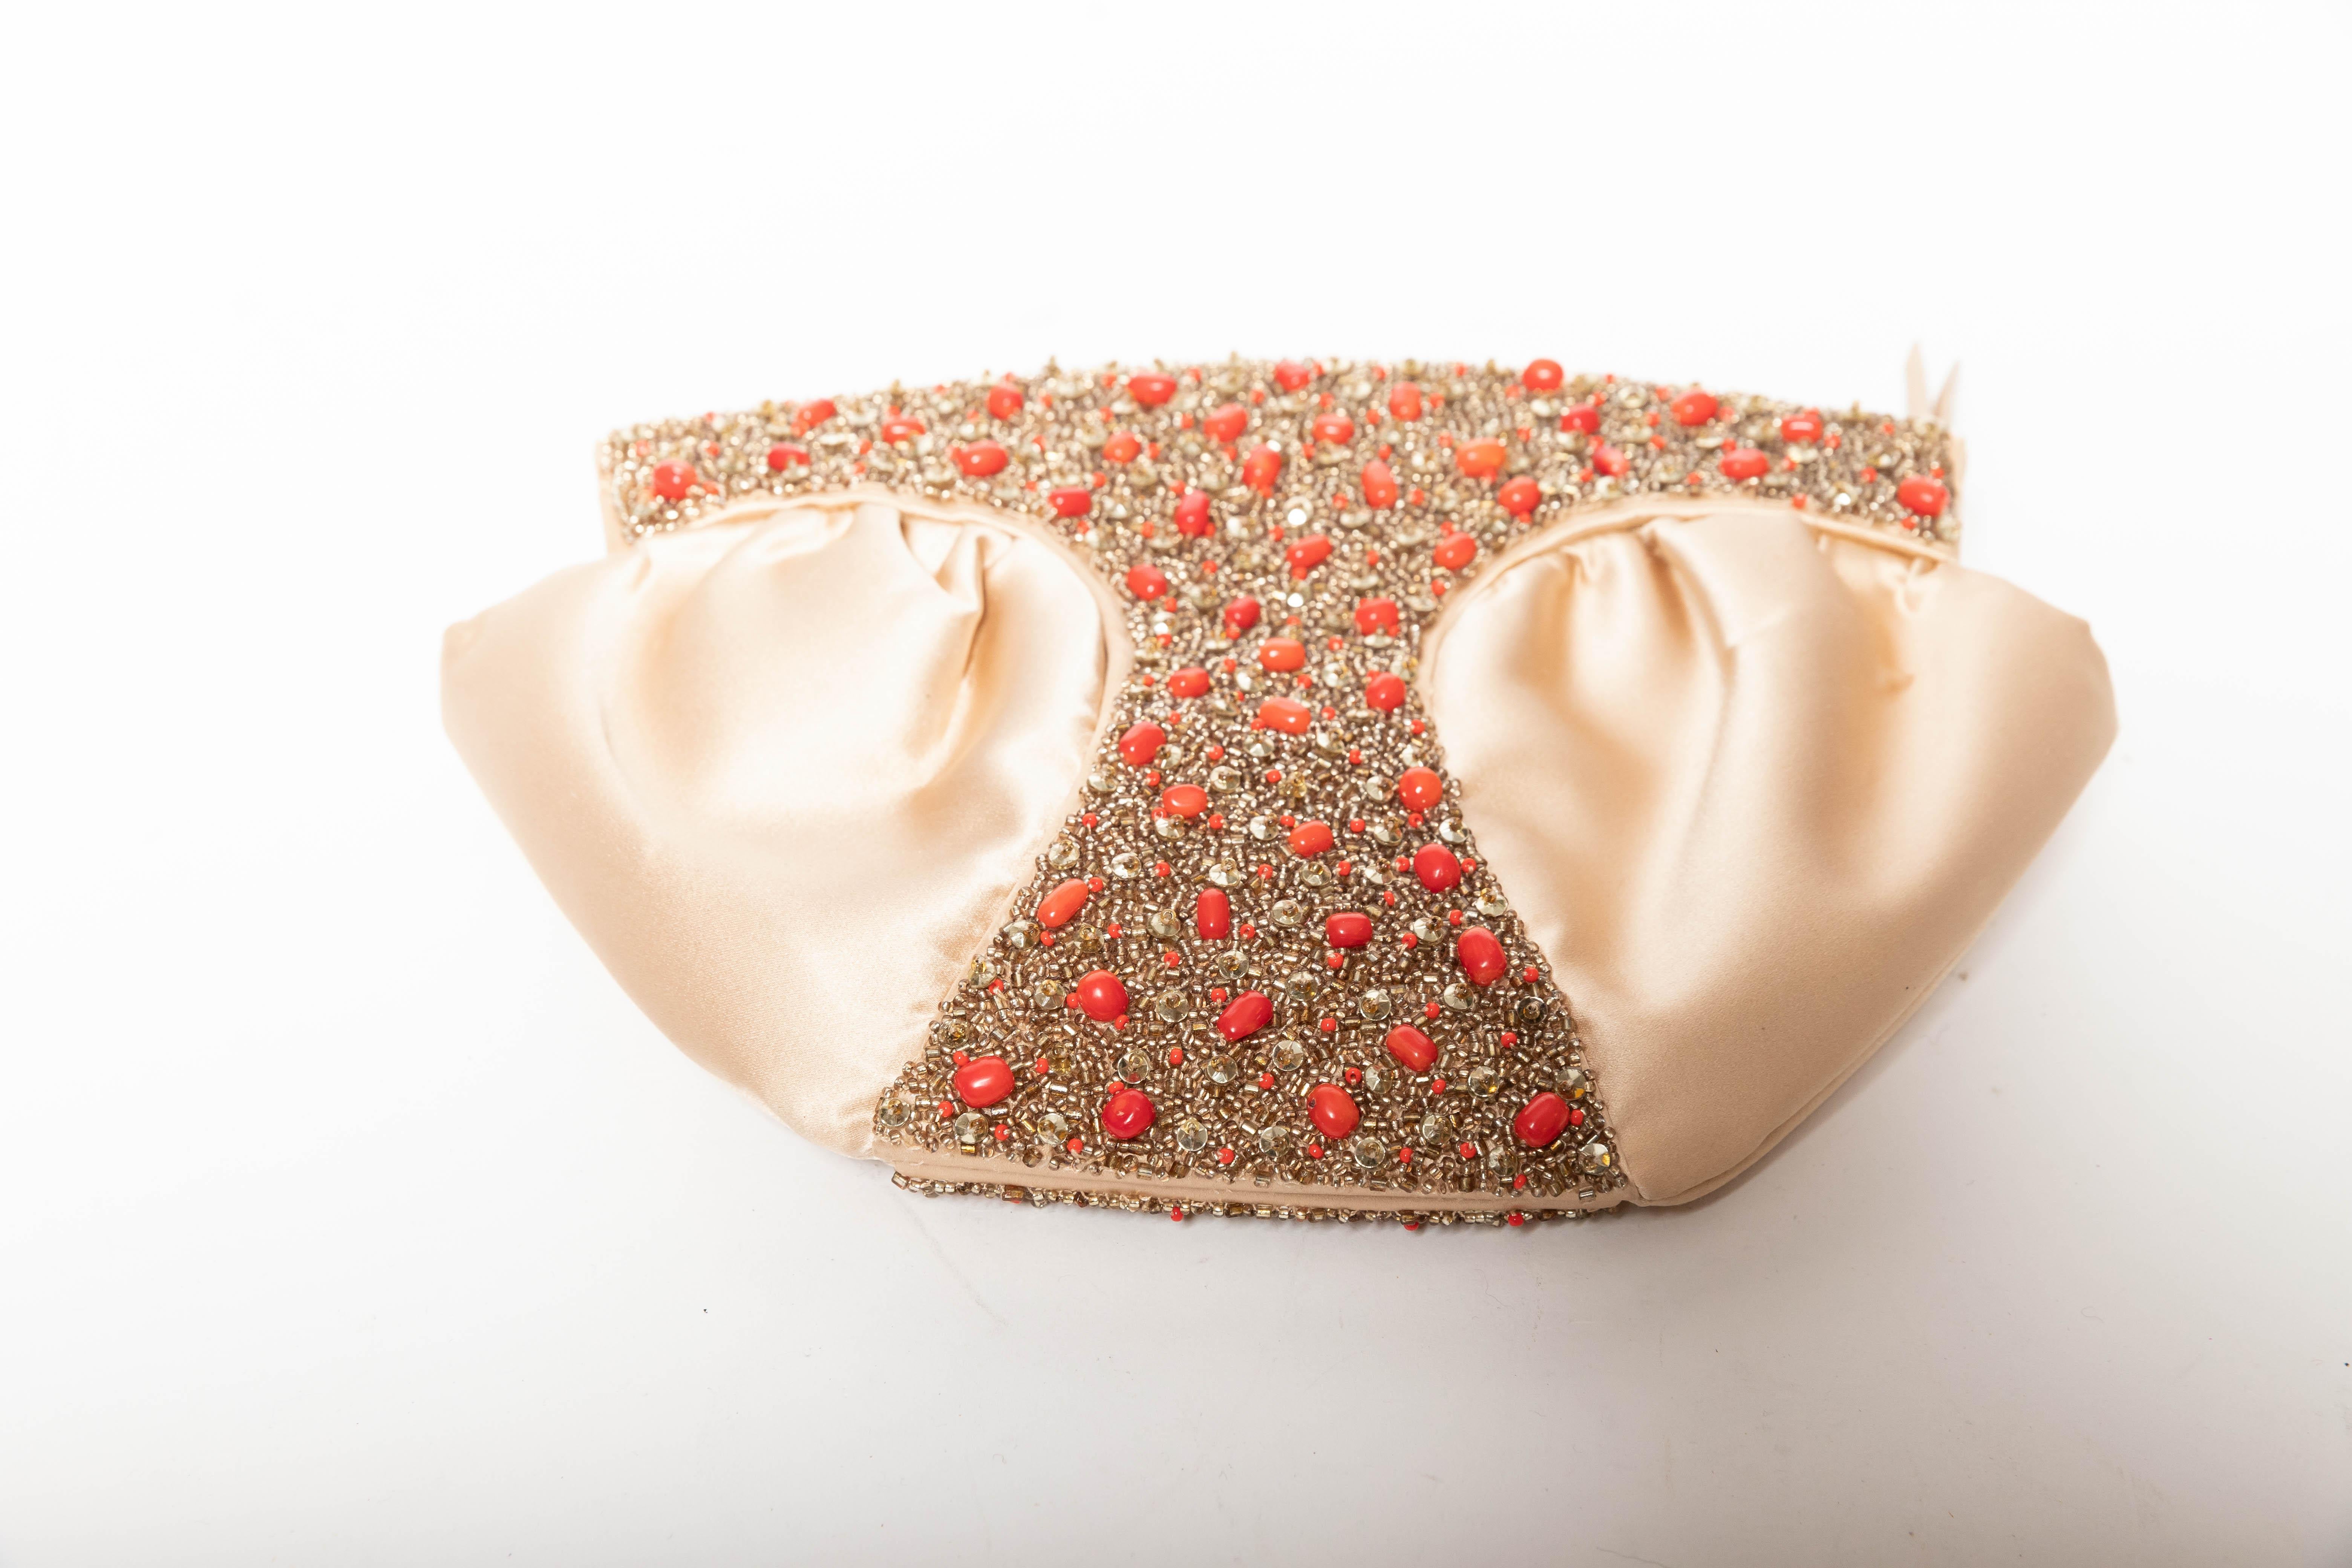 Champagne silk Oscar de la Renta clutch with zip top.
Coral and champagne beads adorn the front and back of this beautiful piece.
One inside zip pocket.